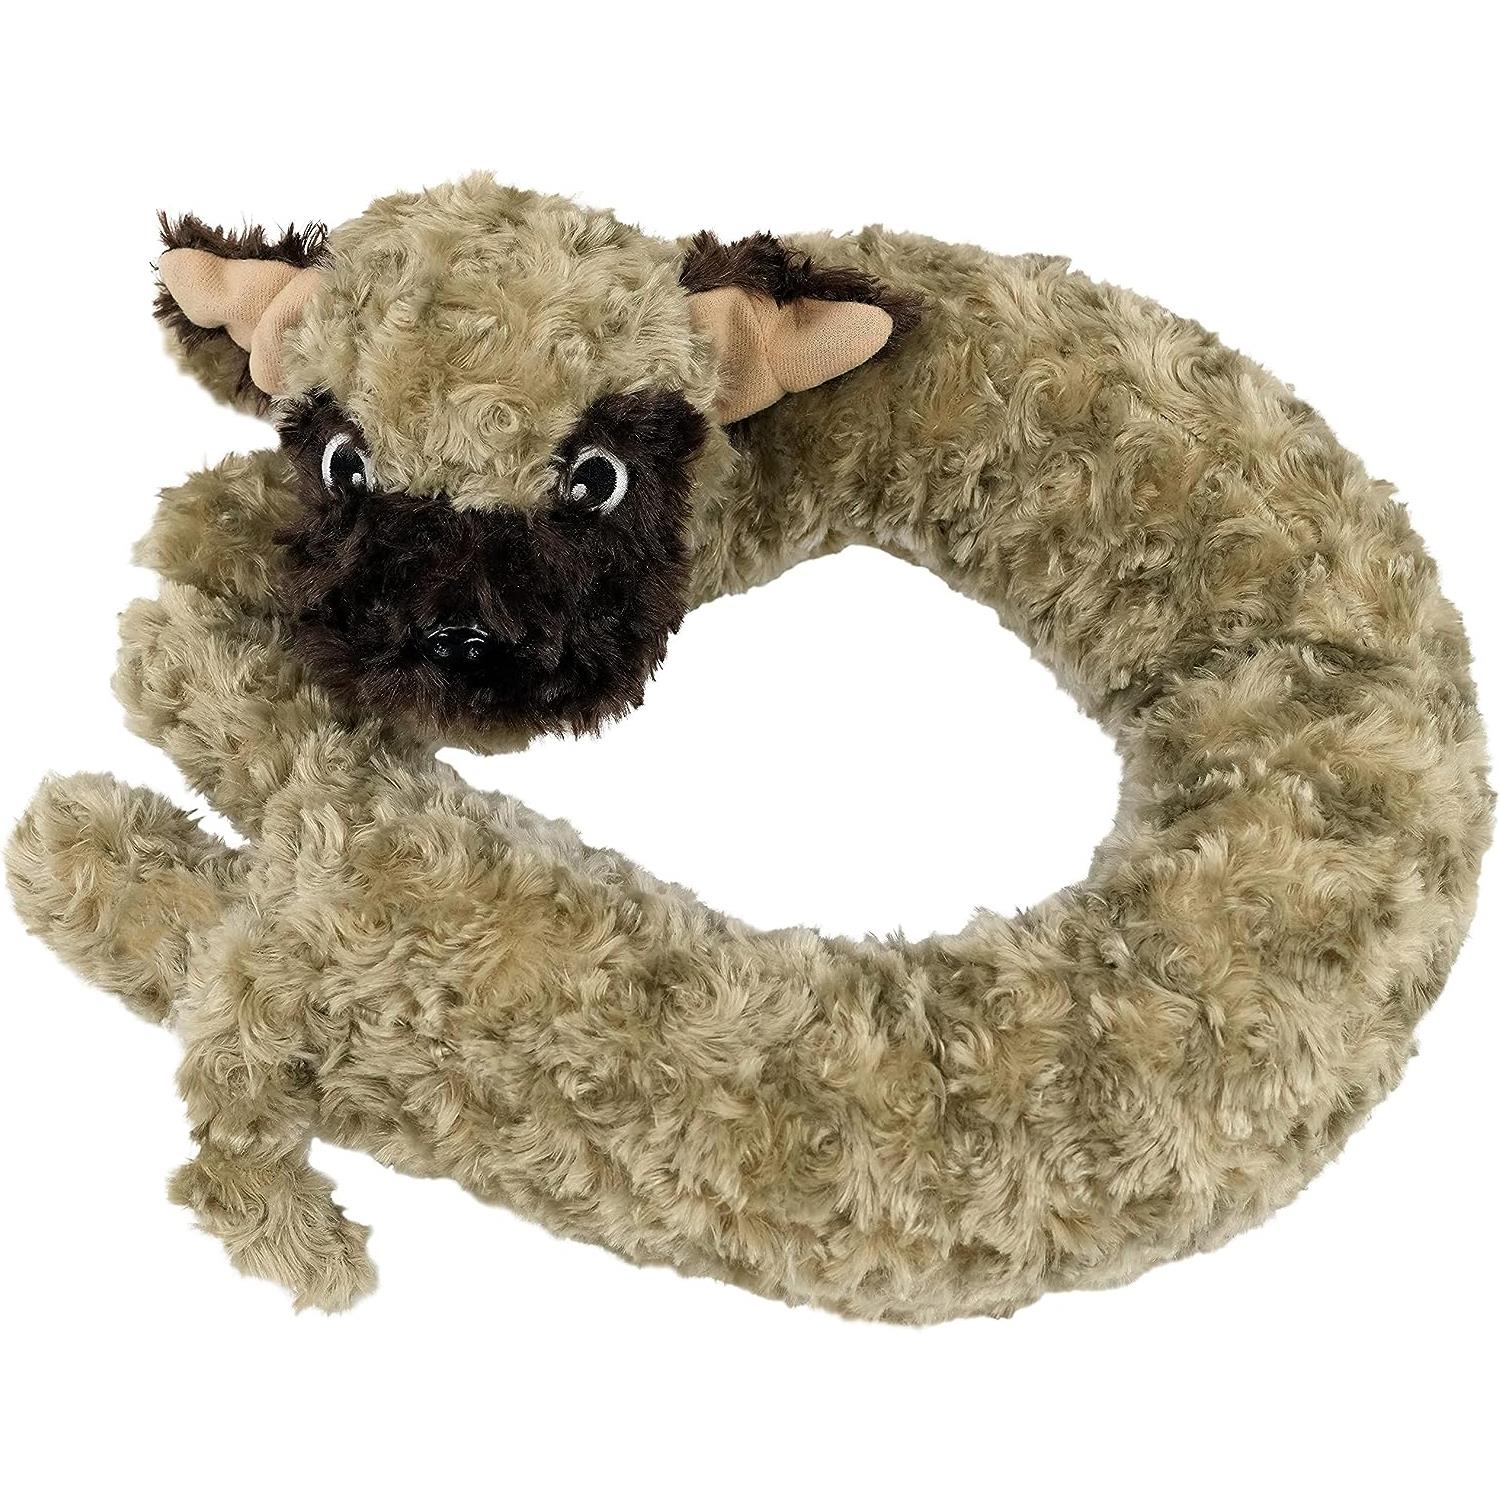 Novelty Brown Dog Excluder by Geezy - The Magic Toy Shop